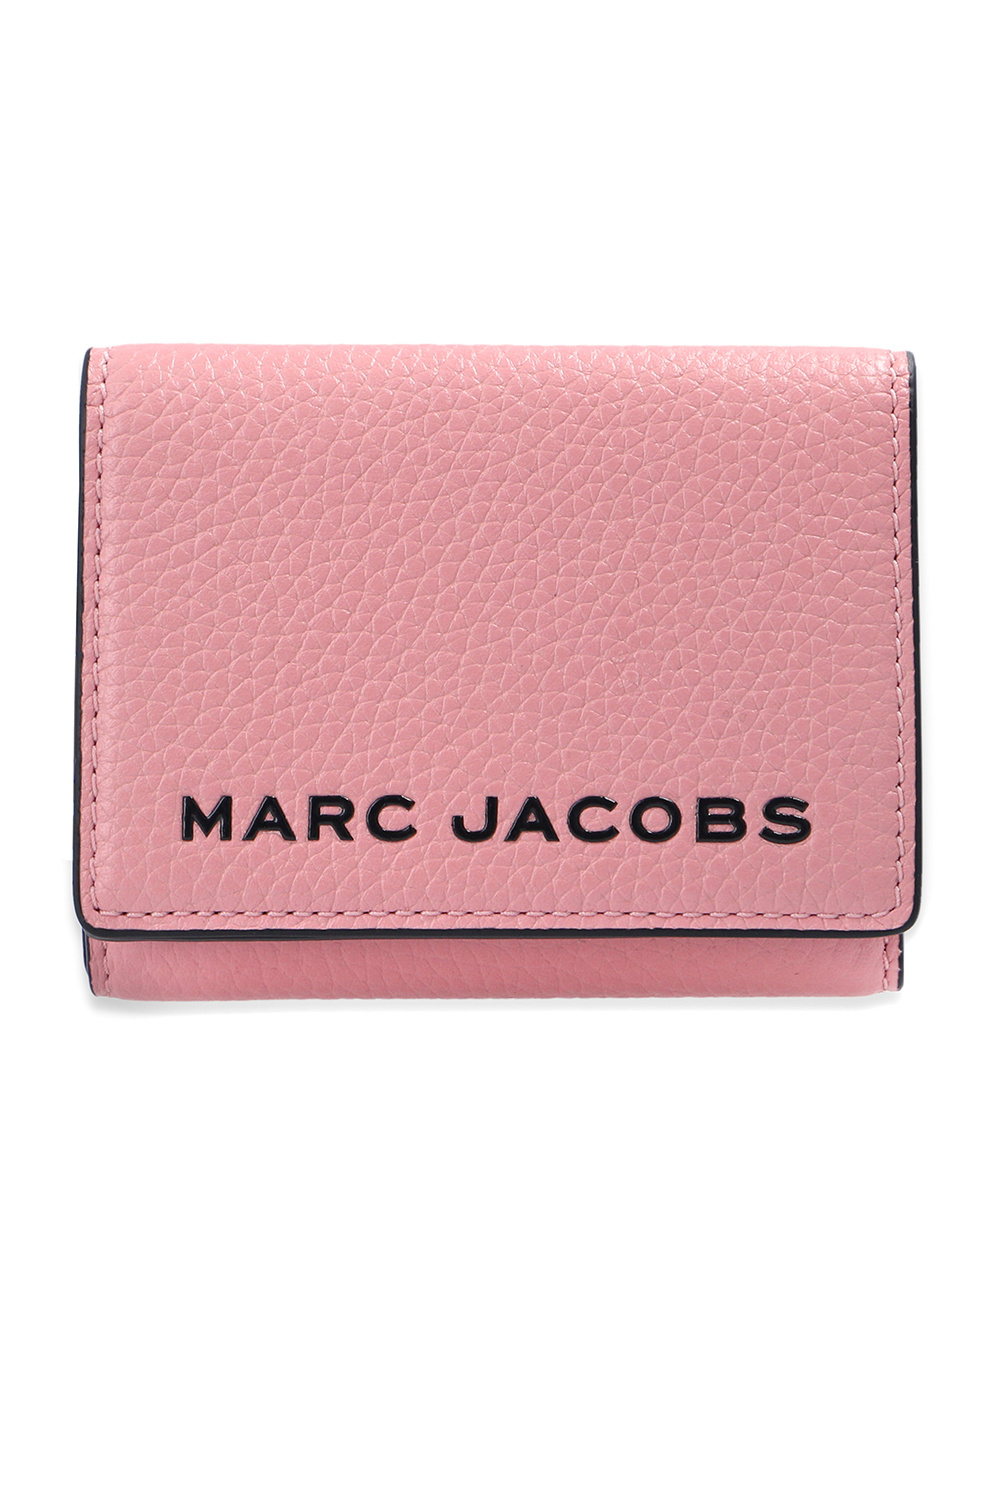 Marc Jacobs (The) The Marc Jacobs Kids 2-12